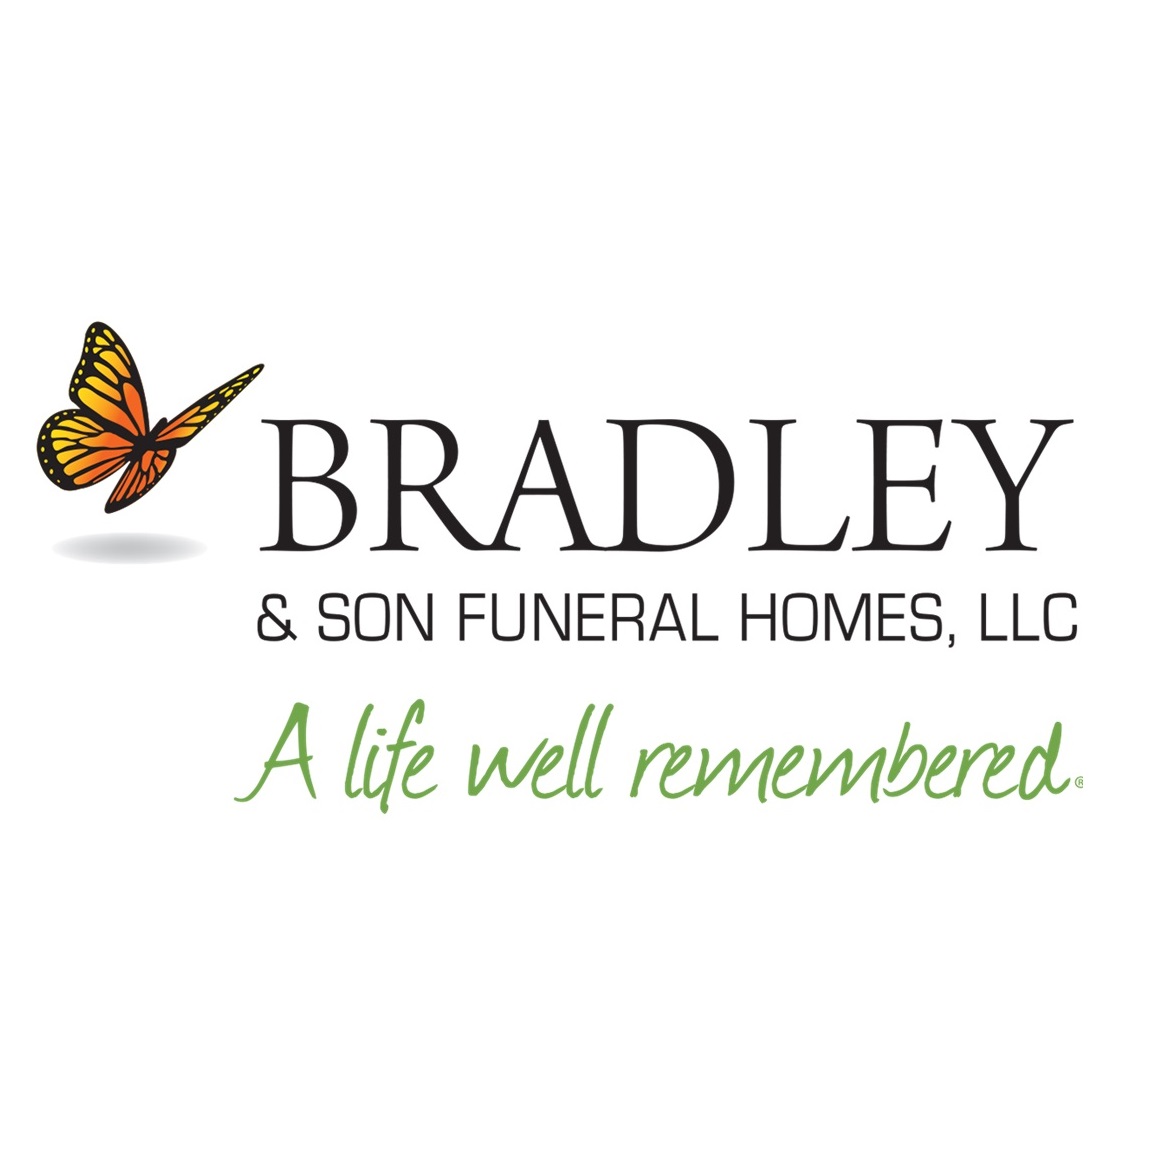 bradley, smith & smith funeral home | funeral directors in springfield